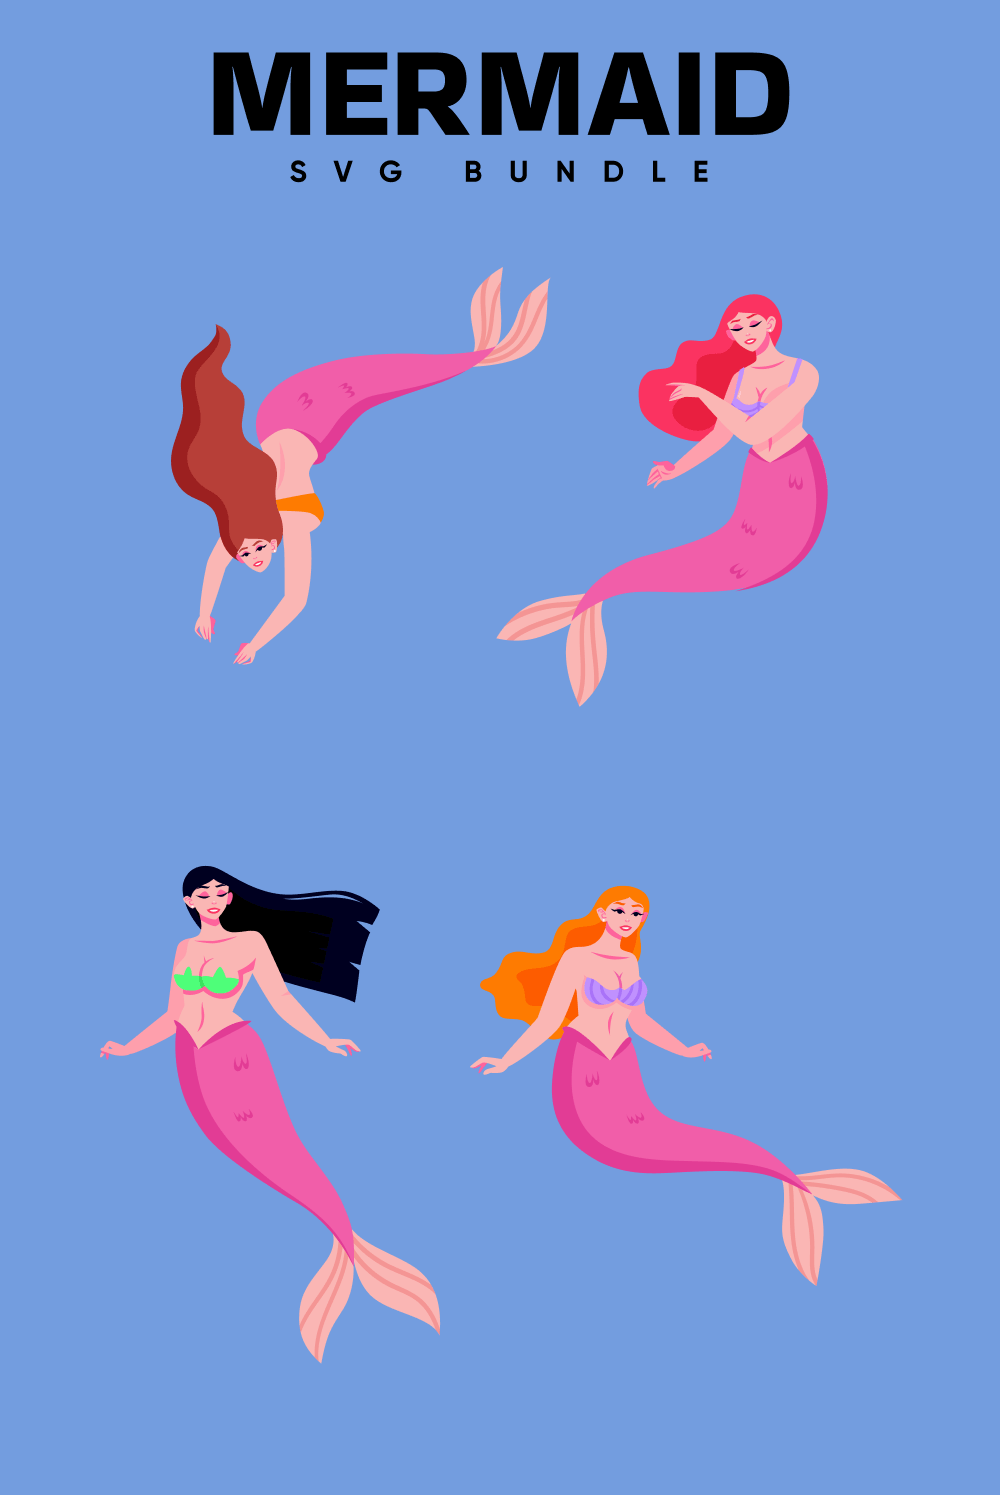 Mermaids with pink tails swim in the water.